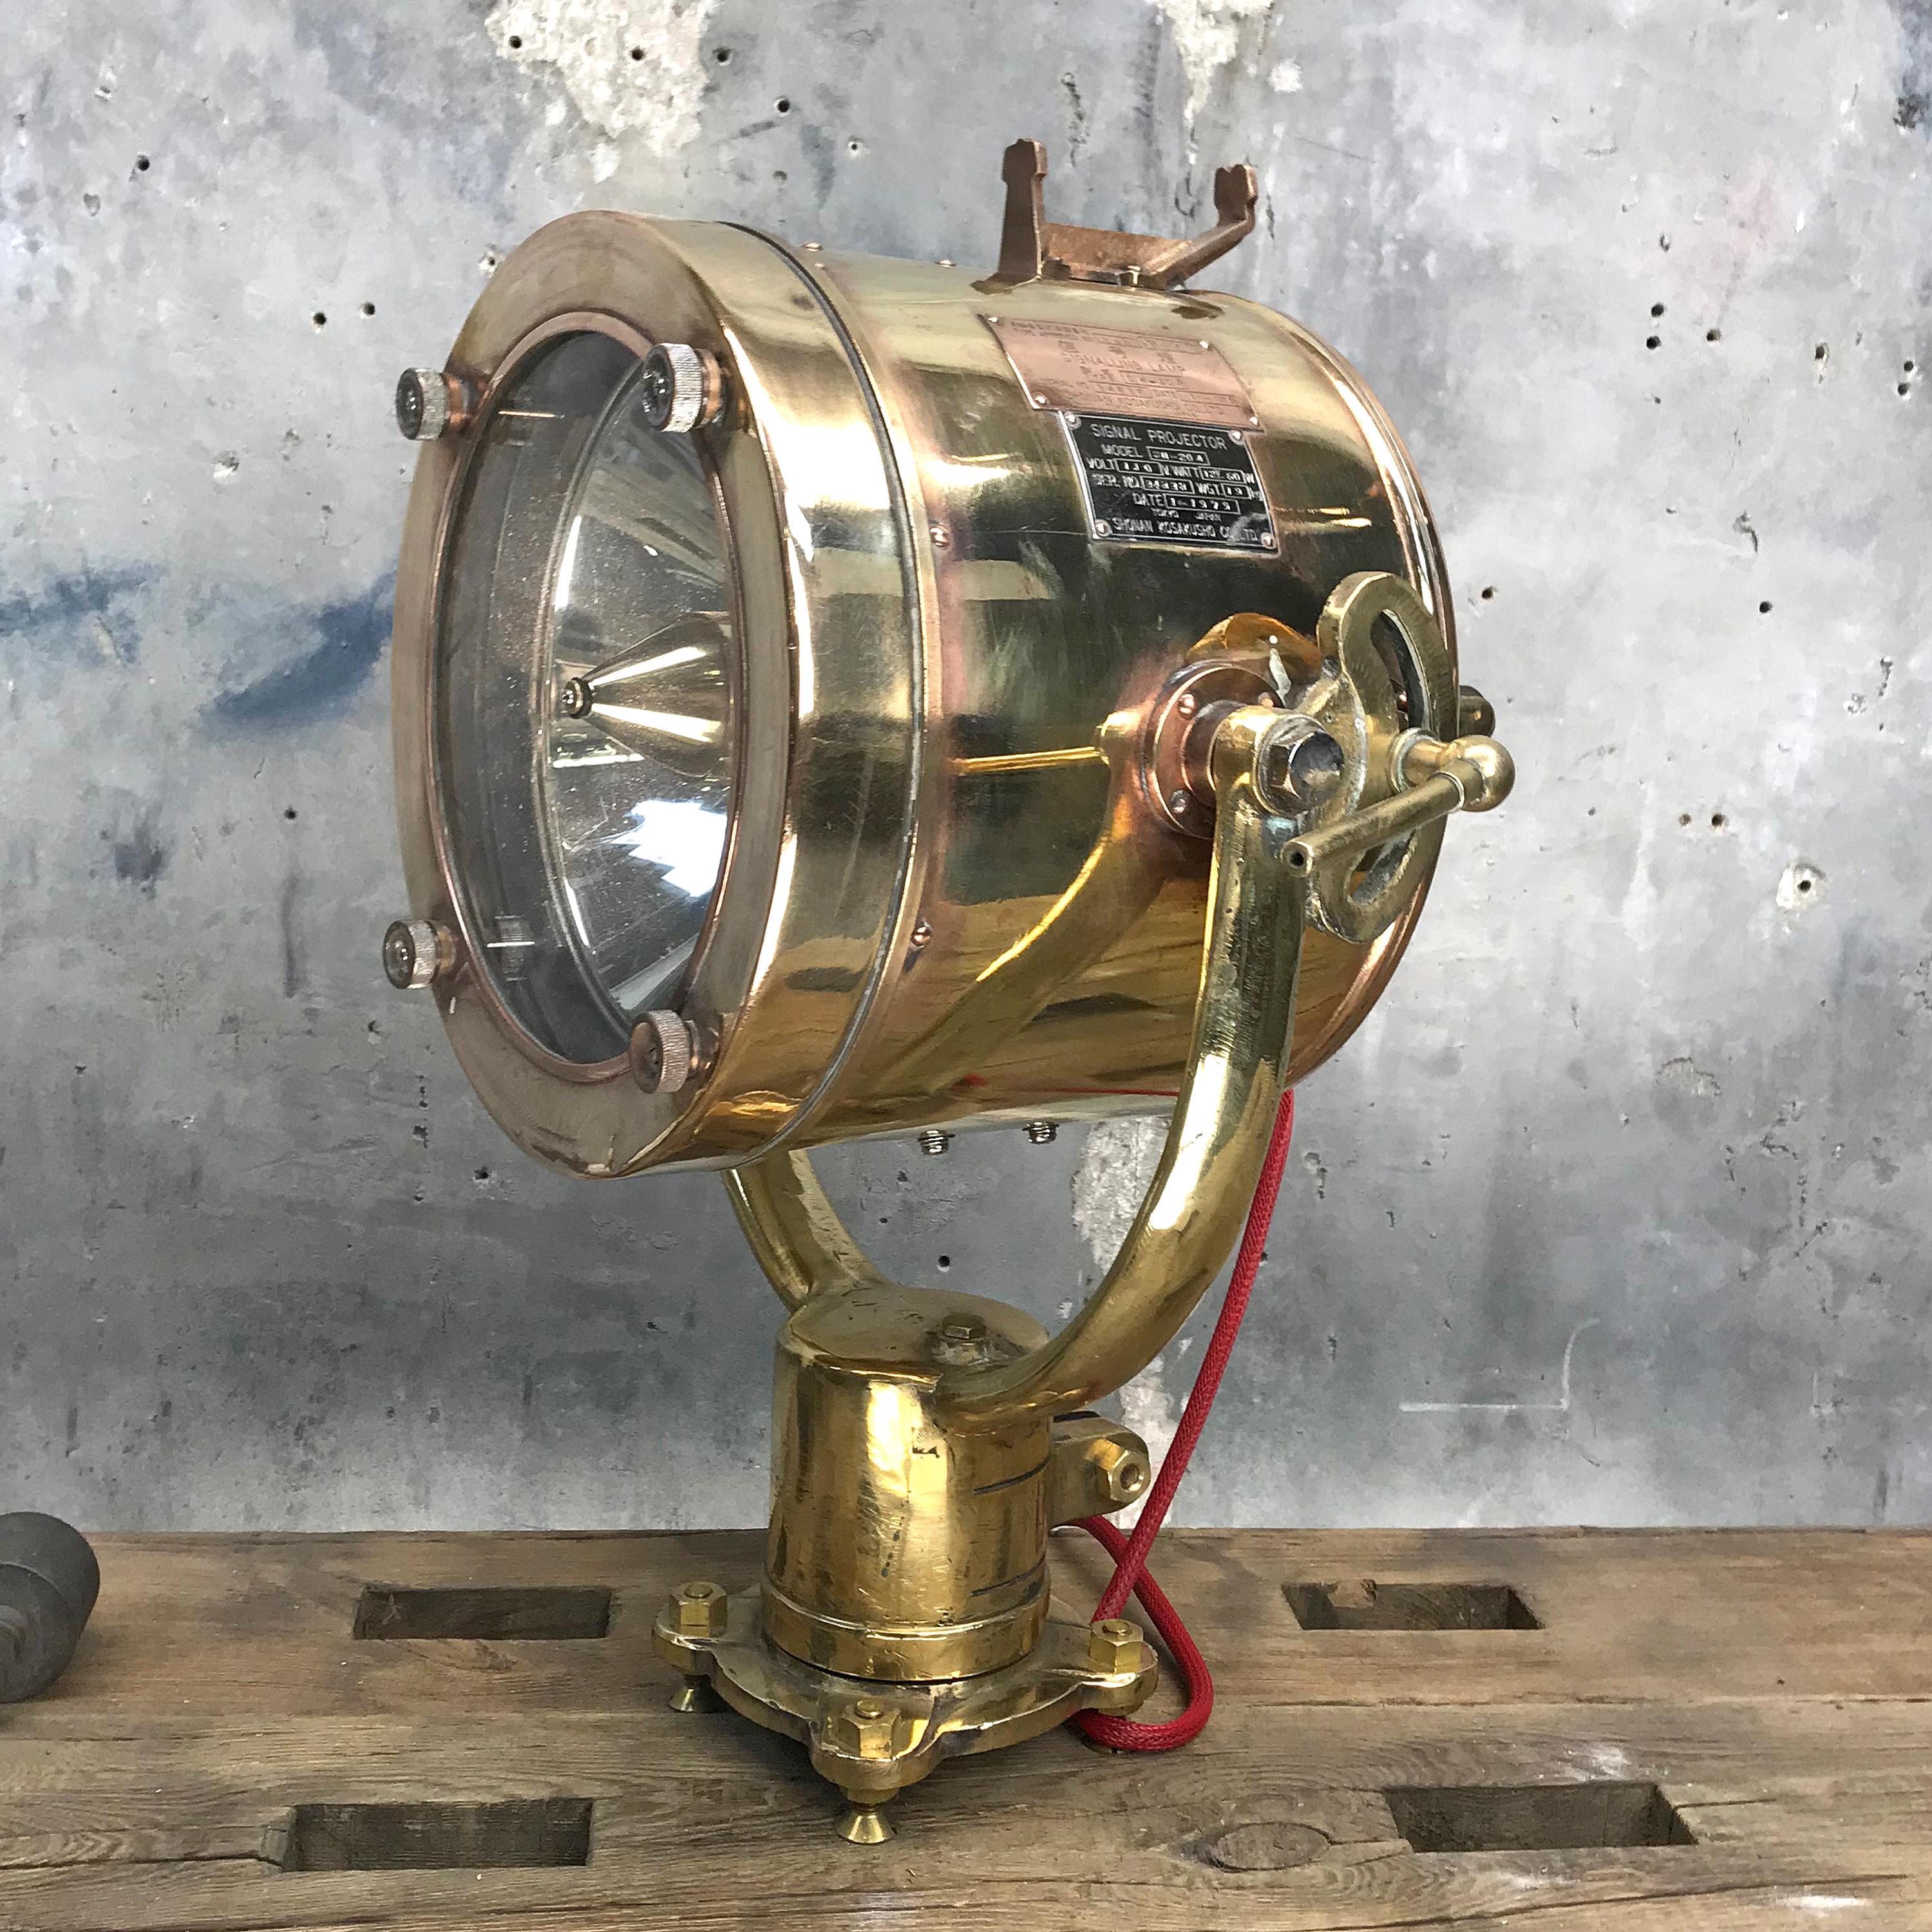 This is a Shonan Kosakusho signalling / projector lamp made in 1979 in Tokyo, made from sold brass and tempered glass.

Reclaimed from Mid-Century war ships, Shonan did manufacture these during World War 2 until the firestorm on Japan ceased